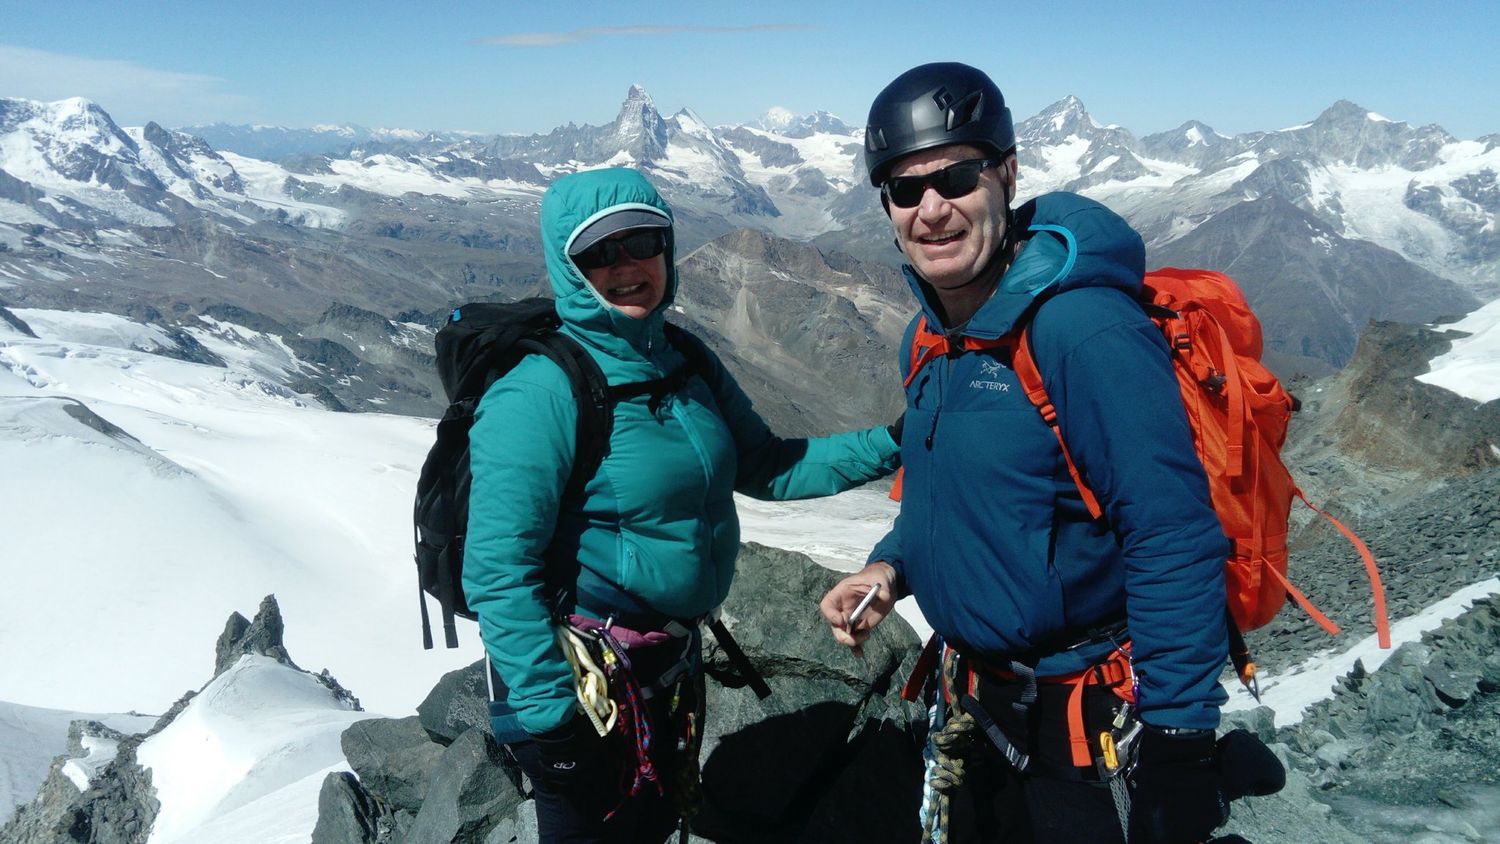  On the summit of the Allalinhorn with the Matterhorn behind 